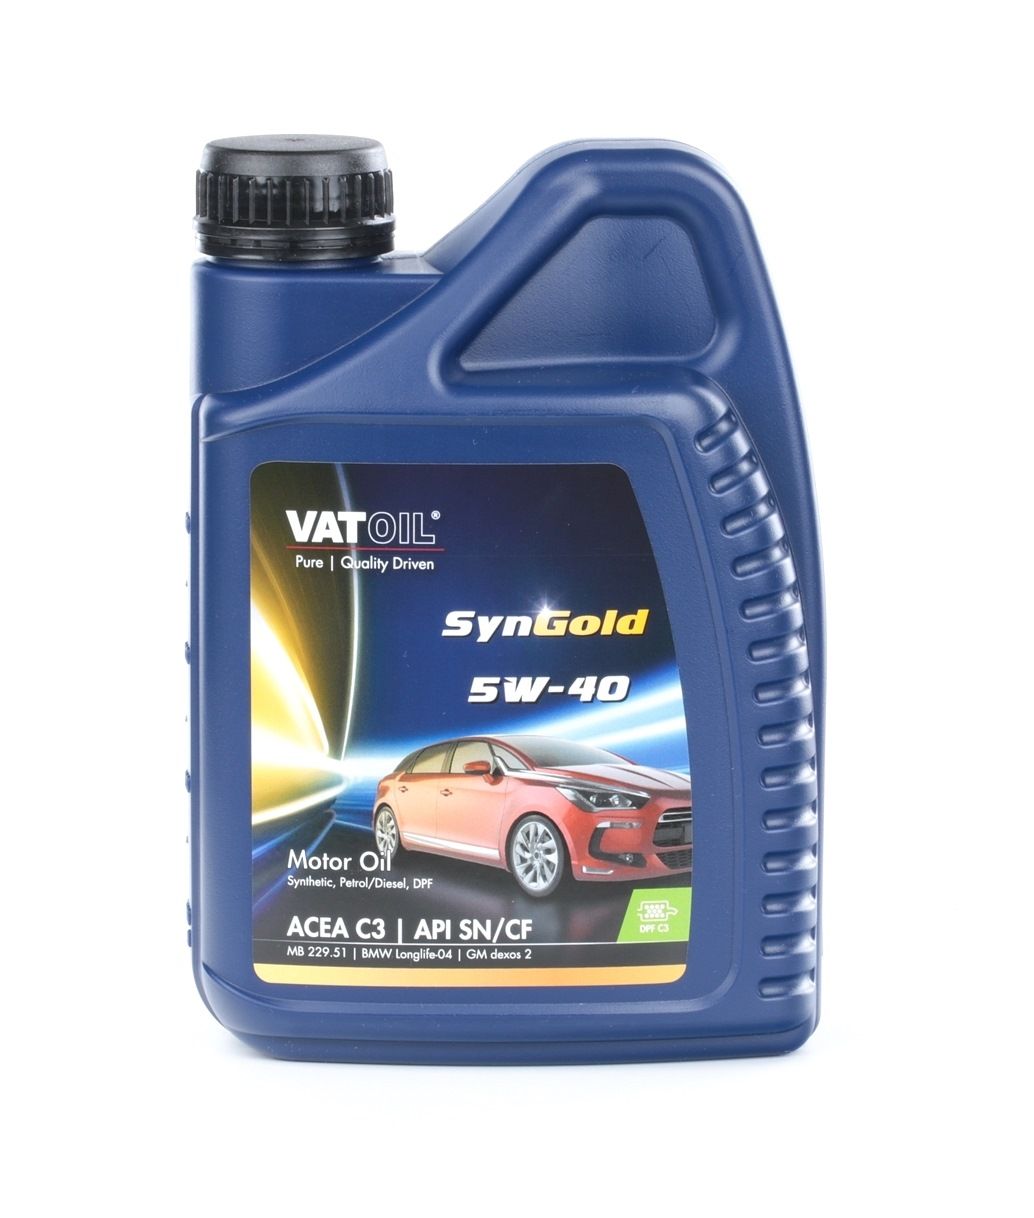 VATOIL SynGold 50010 Engine oil 5W-40, 1l, Synthetic Oil